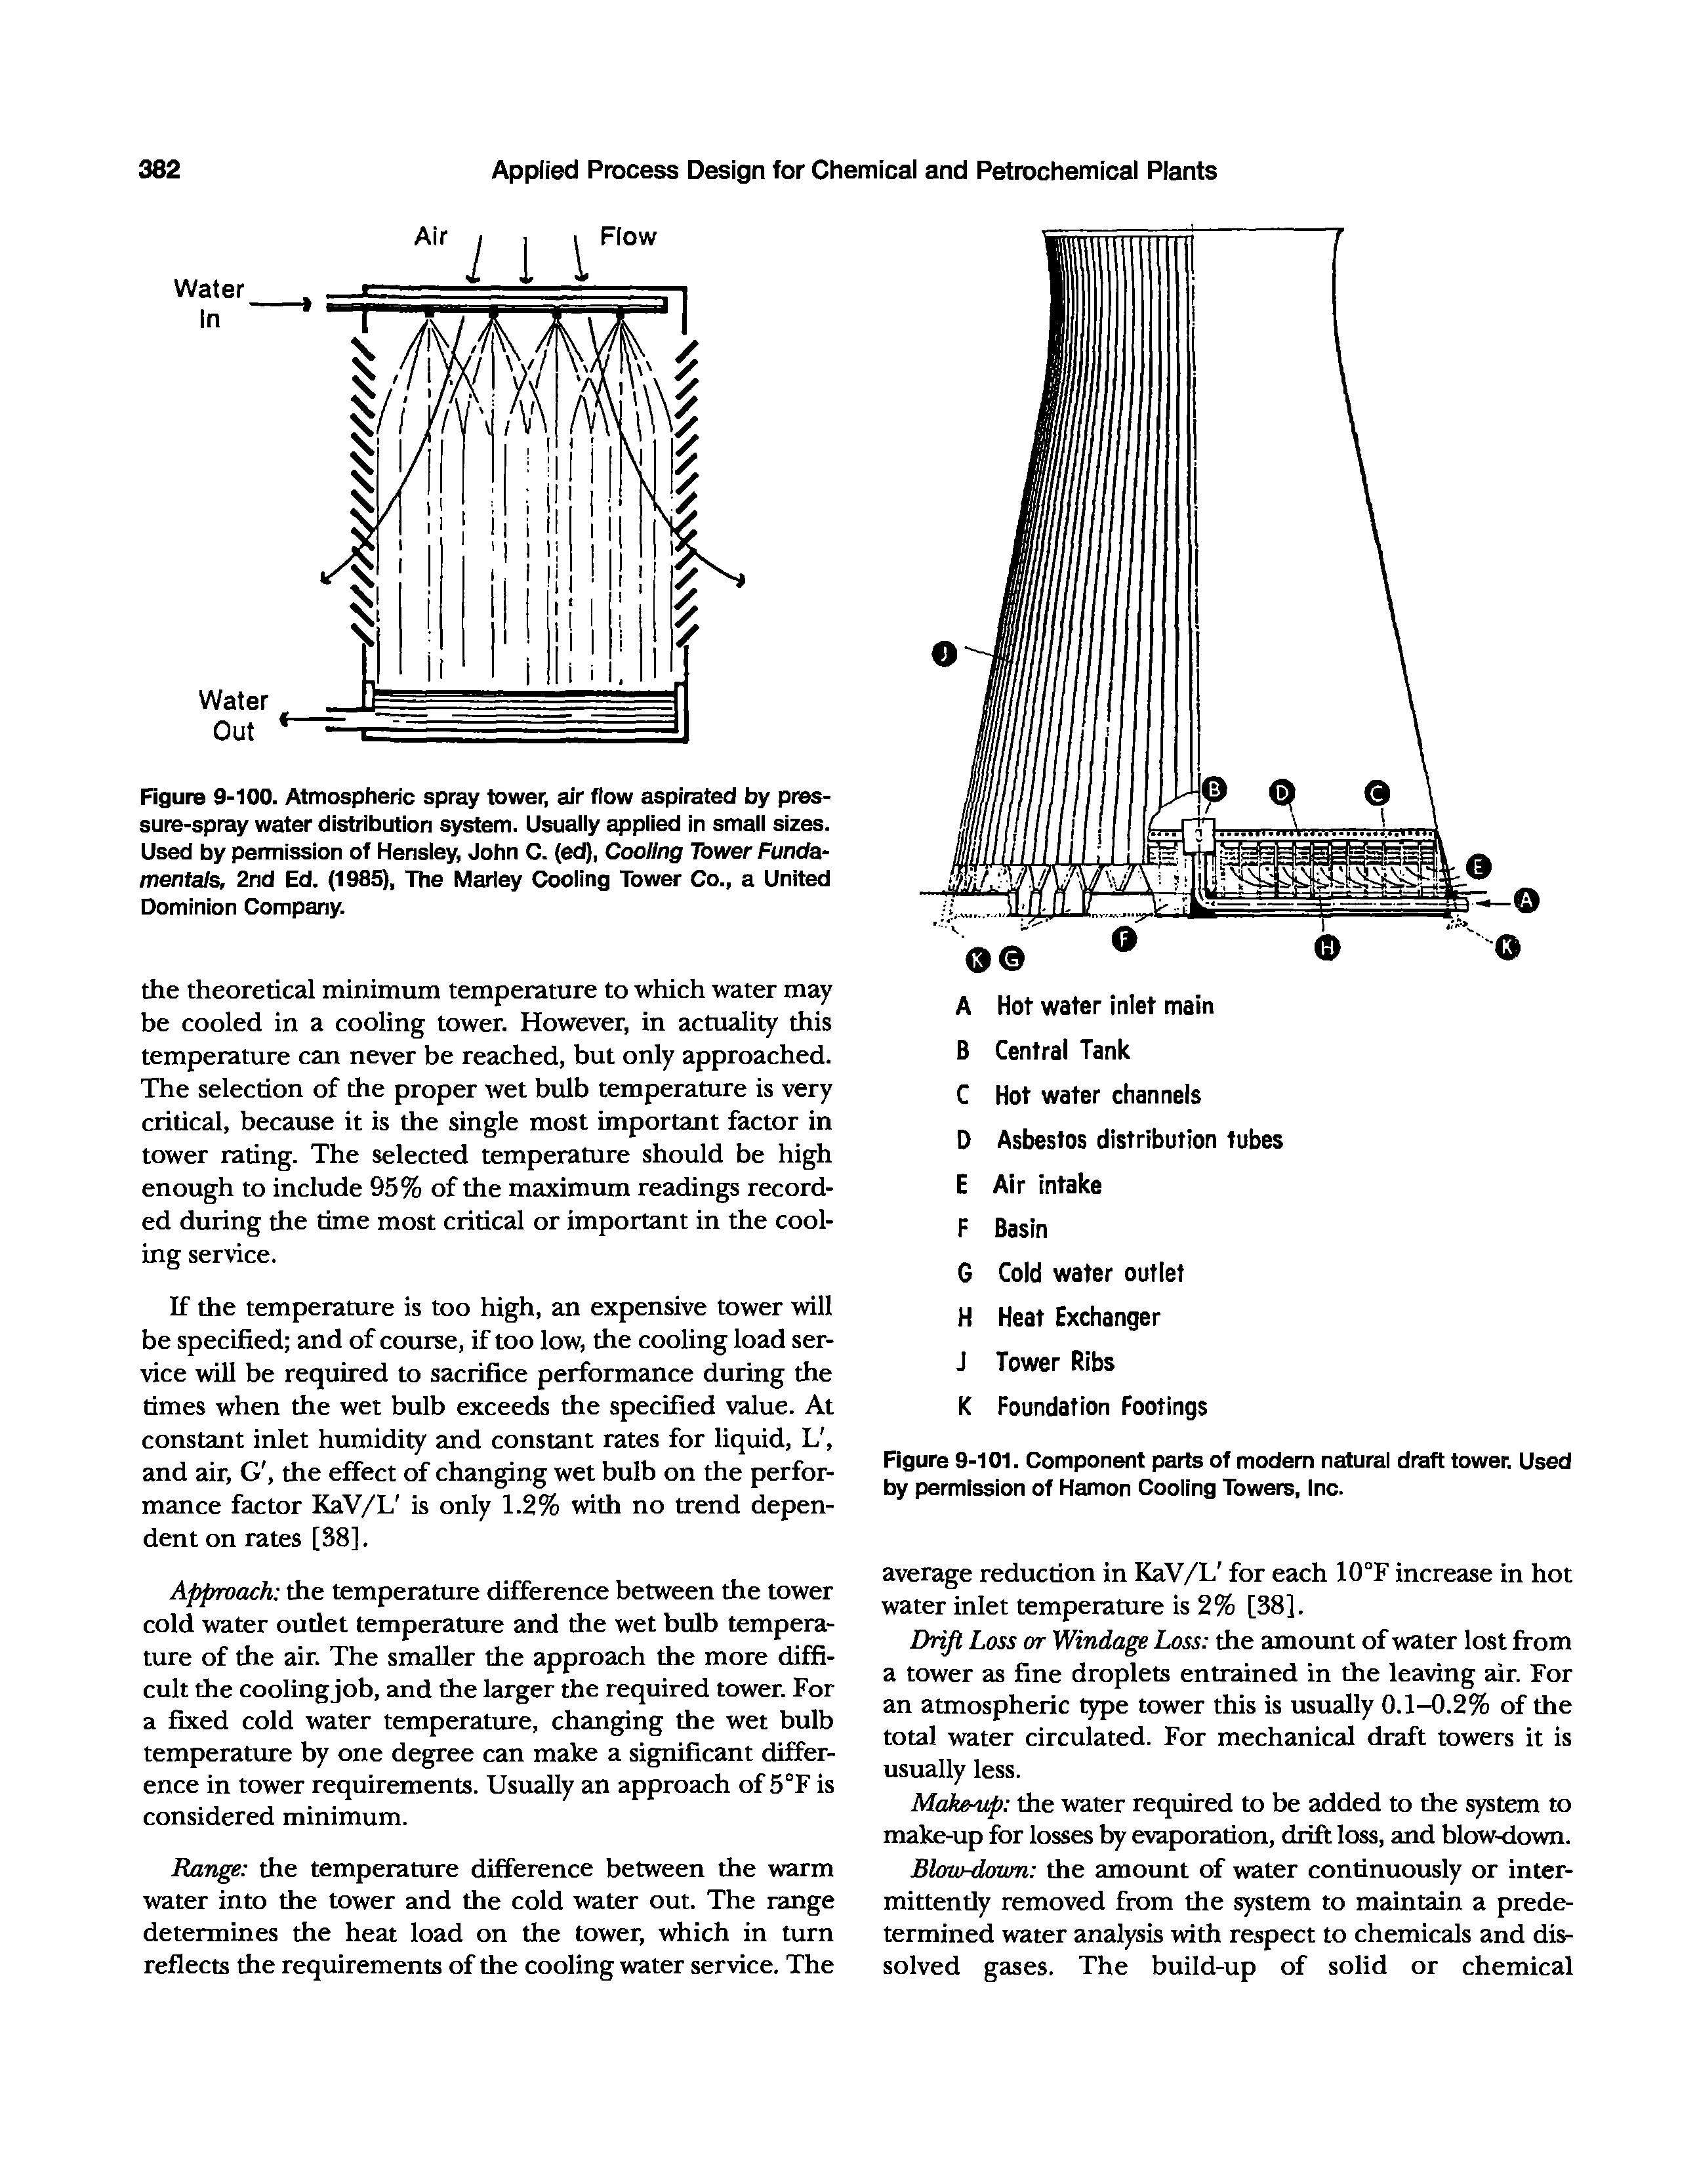 Figure 9-101. Component parts of modem natural draft tower. Used by permission of Hamon Cooling Towers, Inc.